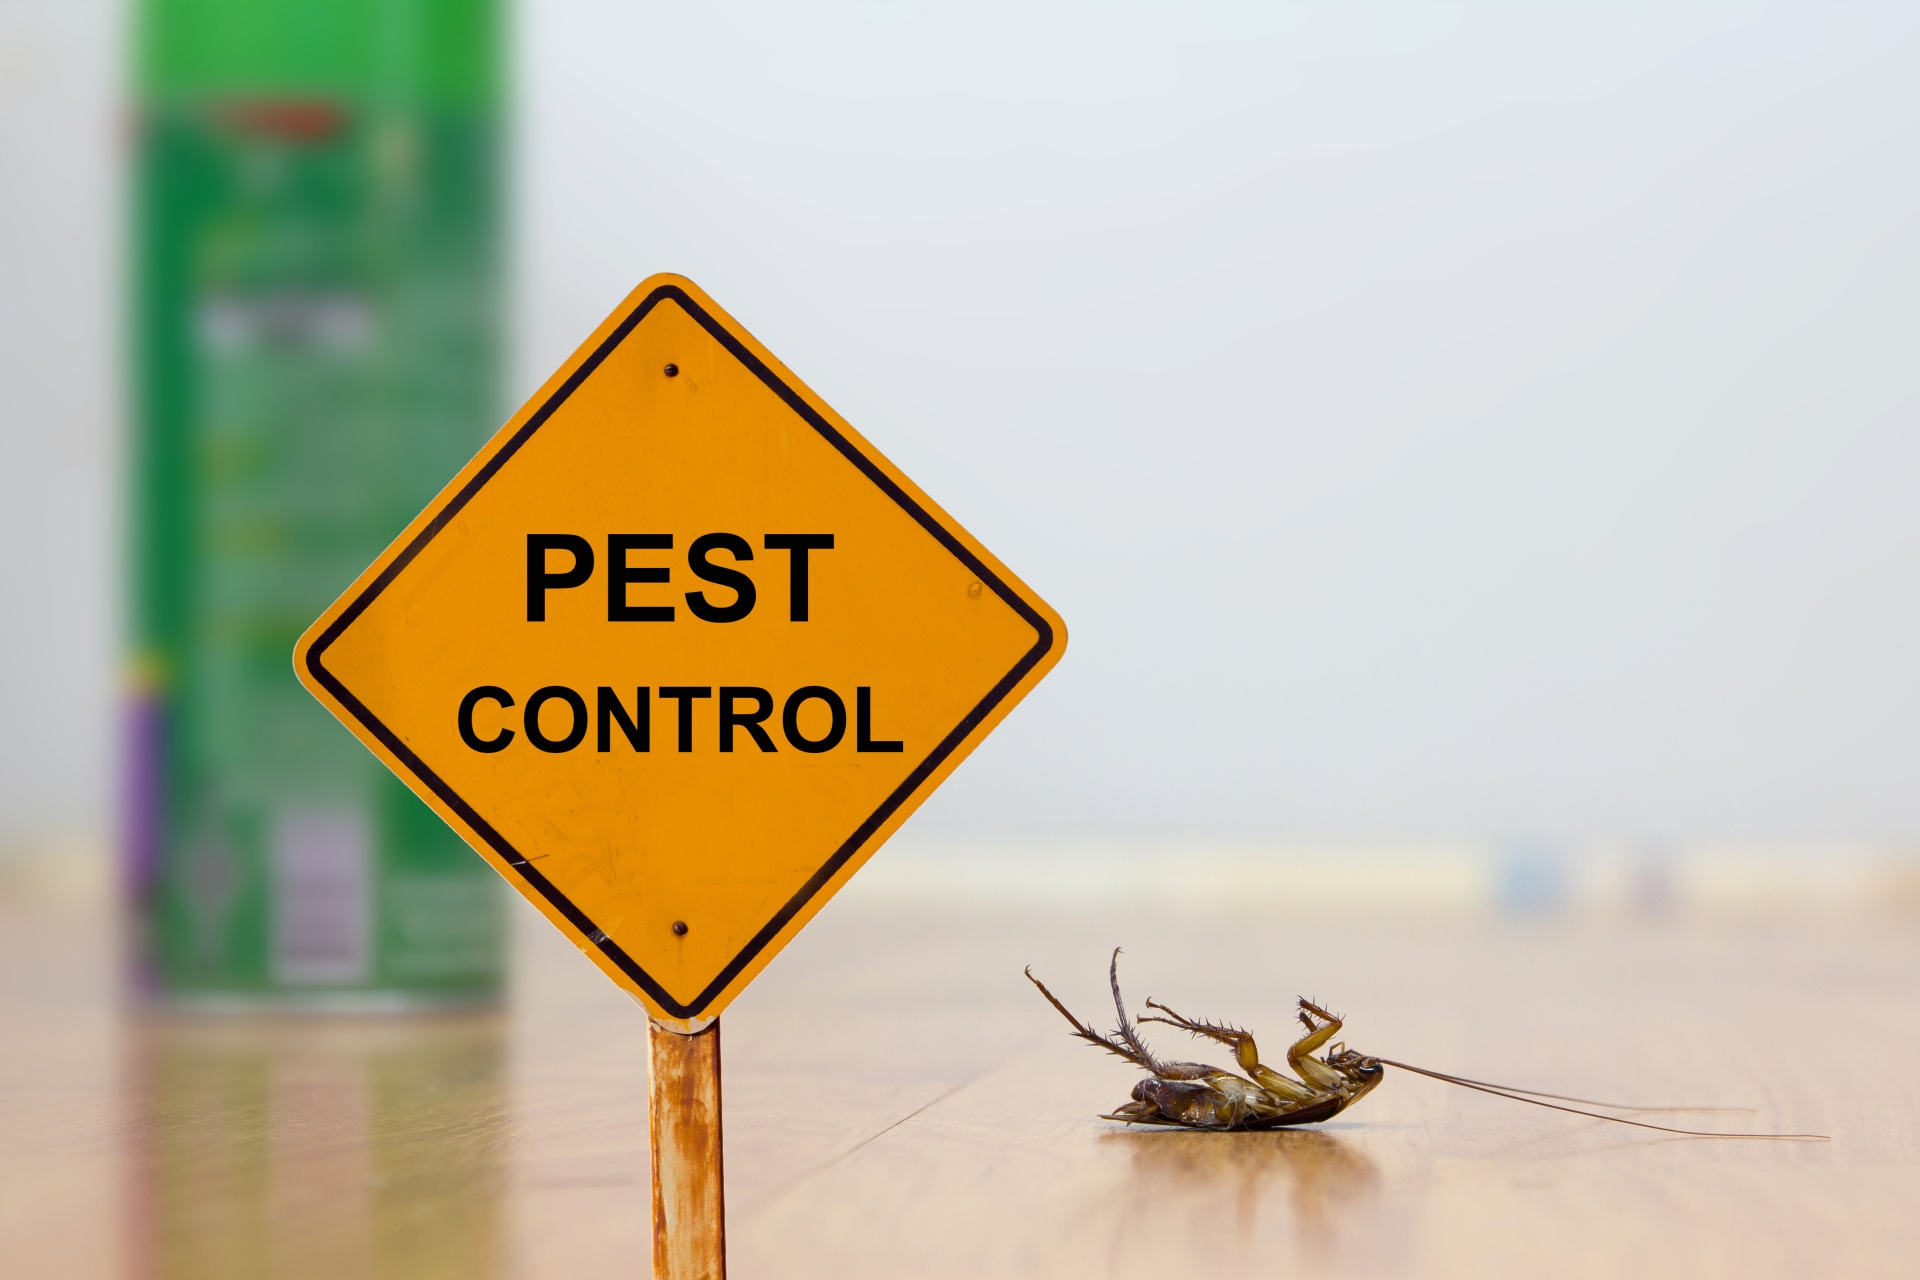 24 Hour Pest Control, Pest Control in East Dulwich, SE22. Call Now 020 8166 9746